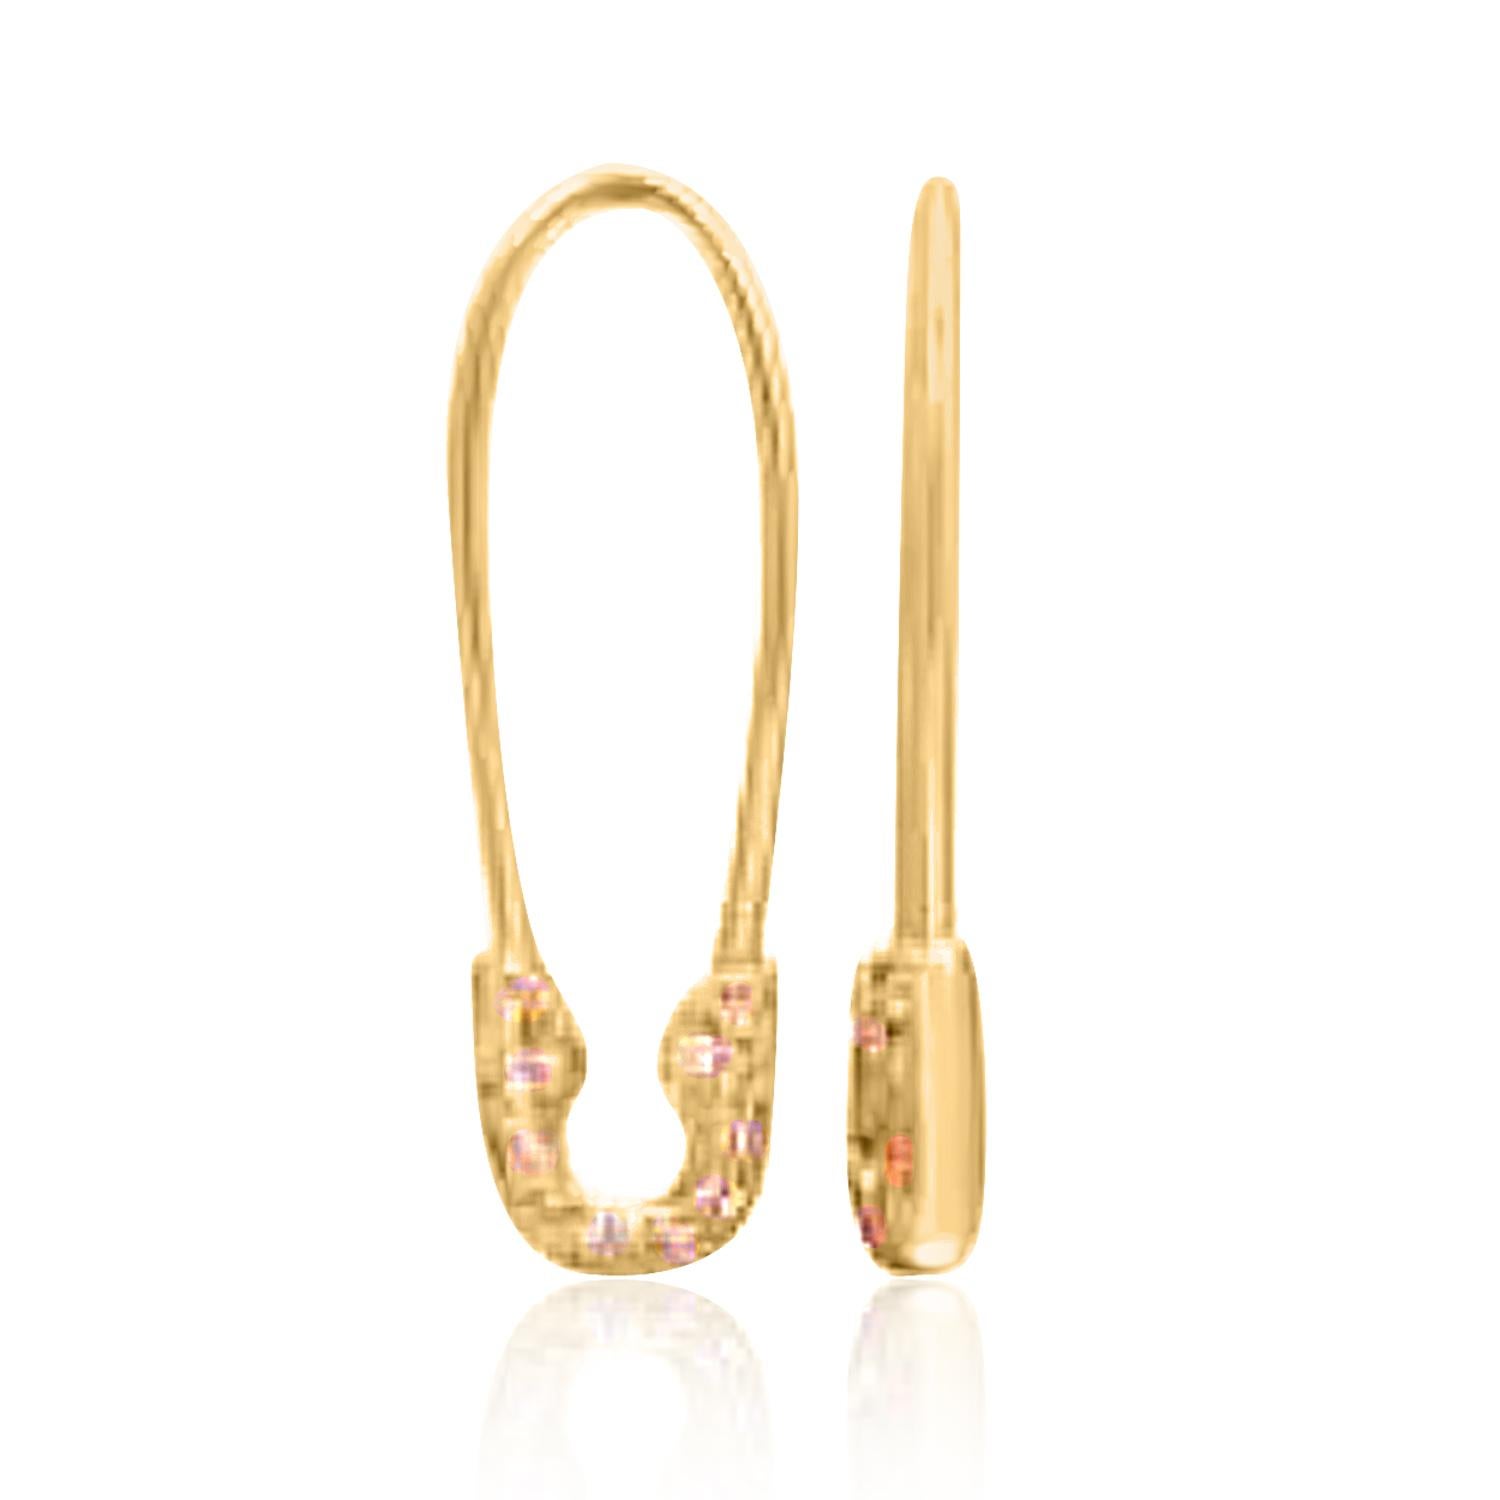 14K Gold Safety Pin Earrings

Earrings Information
Diamond Type : Natural Diamond
Metal : 14k Gold
Metal Color : Rose Gold, Yellow Gold, White Gold
Total Carat Weight : 0.072 ttcw
Diamond colour-clarity : G/H Color VS/Si1 Clarity
 

JEWELRY